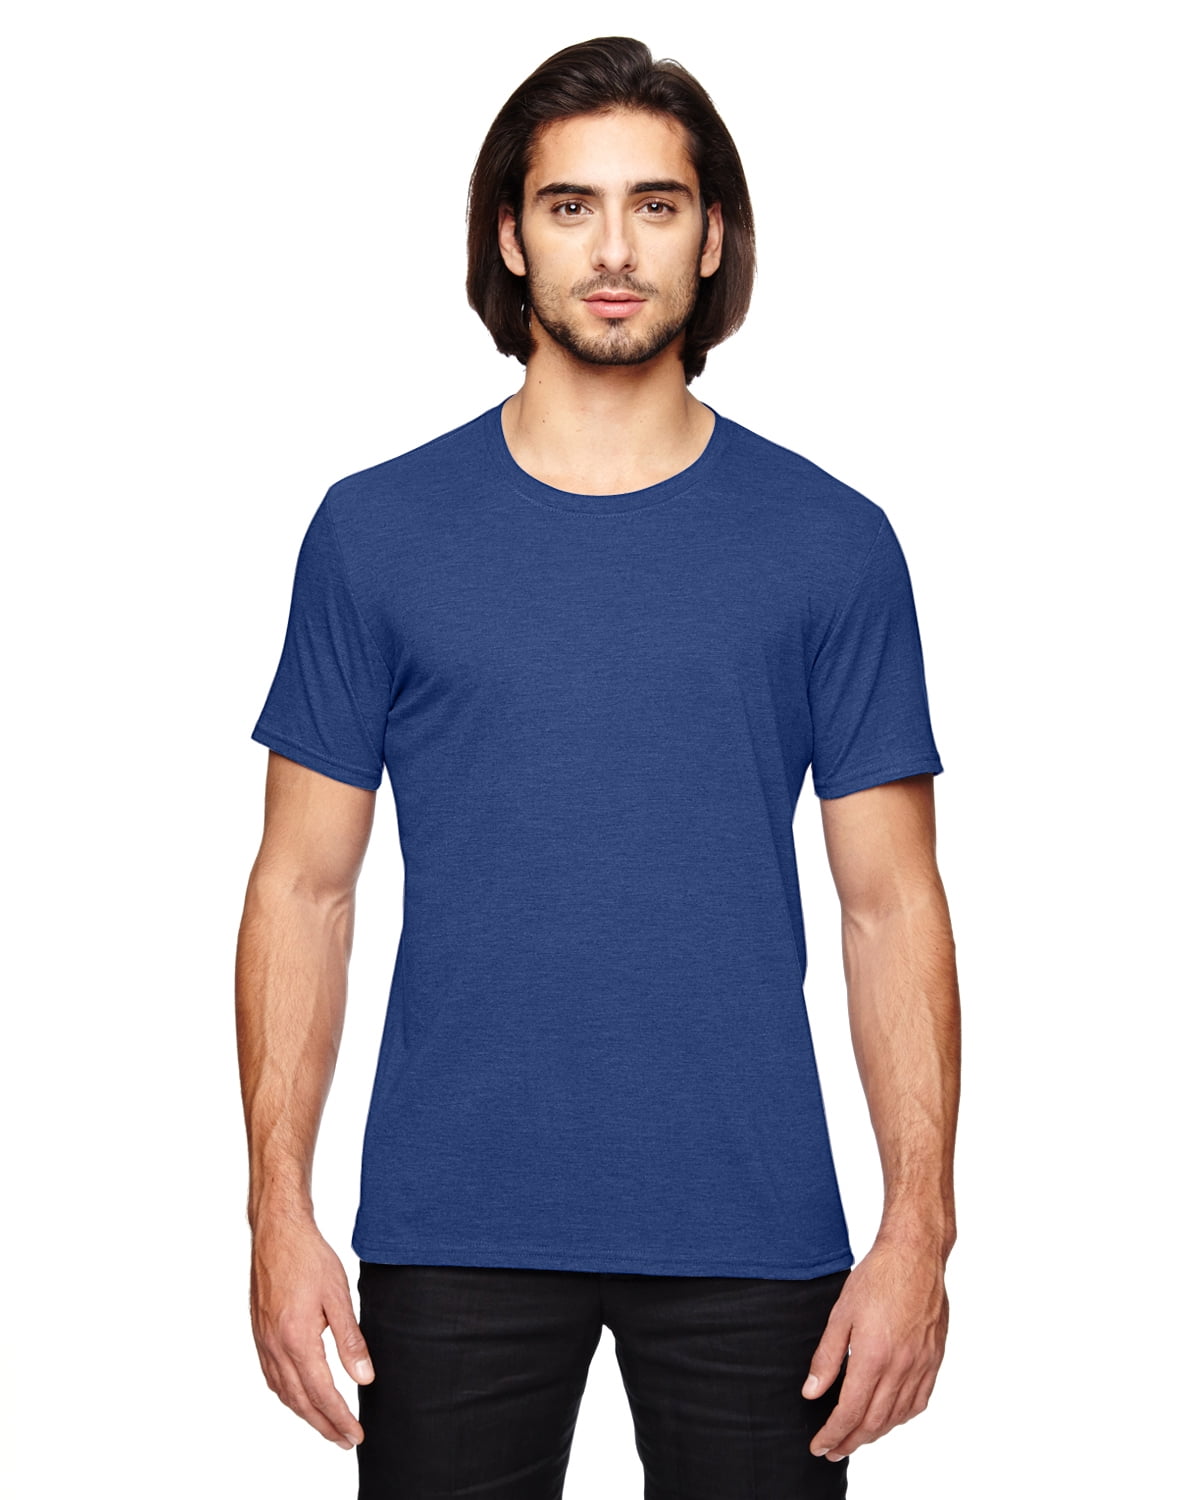 Men\'s Crew BLUE Sleeves JustBlanks Regular Short T Shirt Neck Tri-Blend Needle 3X-Large - Men Tee - Poly-Cotton-rayon HEATHER Jersey for Sleeve Double Tee